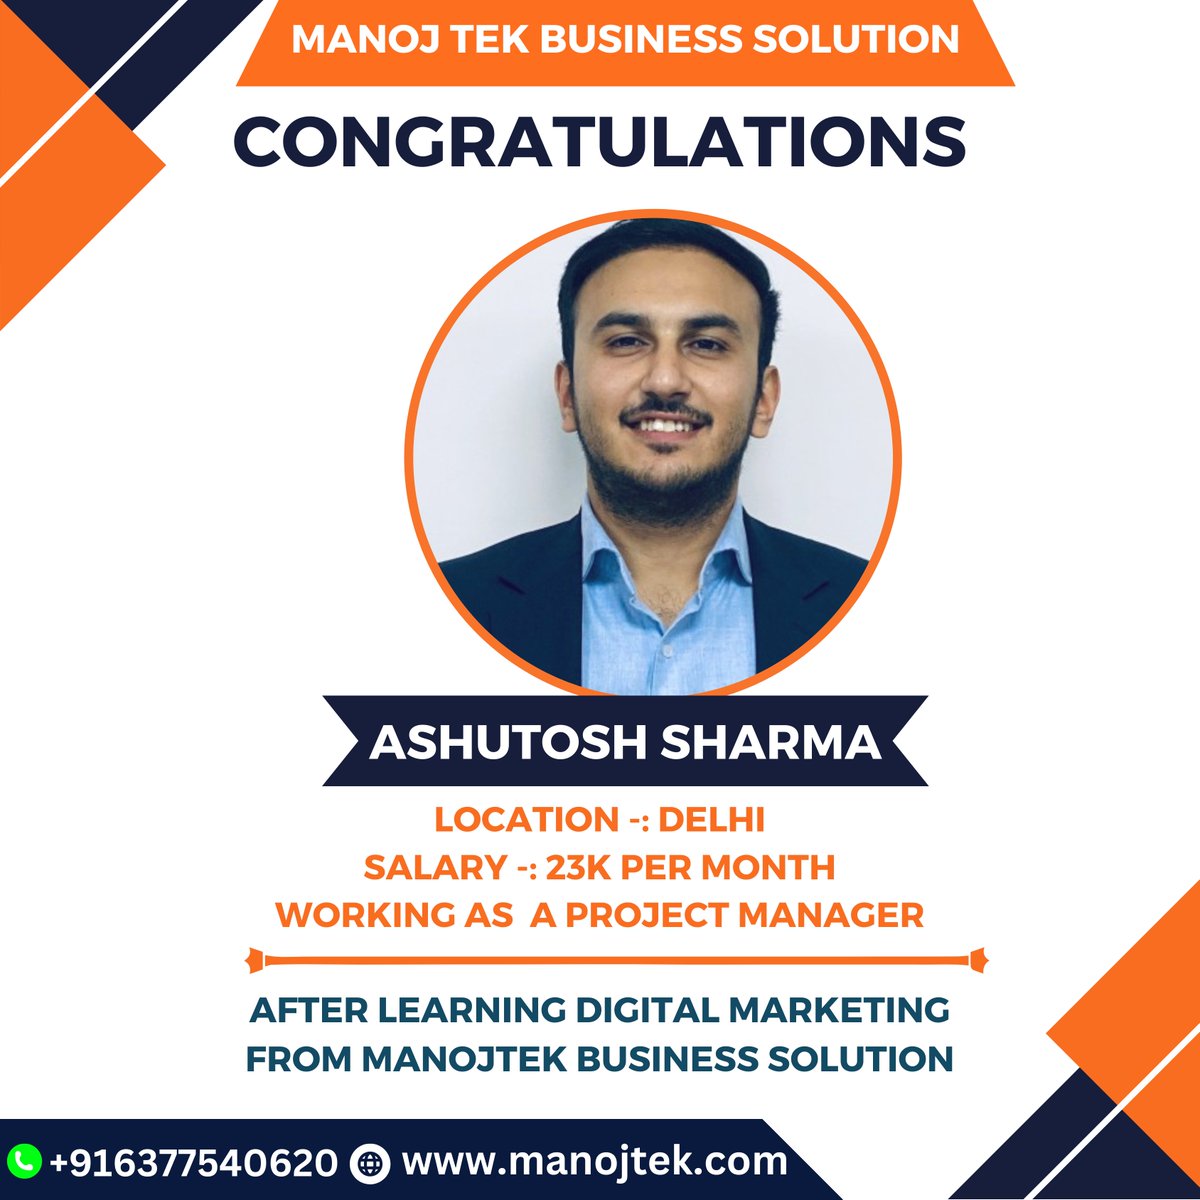 'Celebrating Ashutosh Sharma's achievements as a dedicated Project Manager in Delhi, setting milestones at 23k per month! Congratulations on your success!'#ProjectManager #DelhiAchievements #CareerMilestones #SuccessStories
#HardWorkPaysOff #CareerGrowth #CongratulationsAshutosh